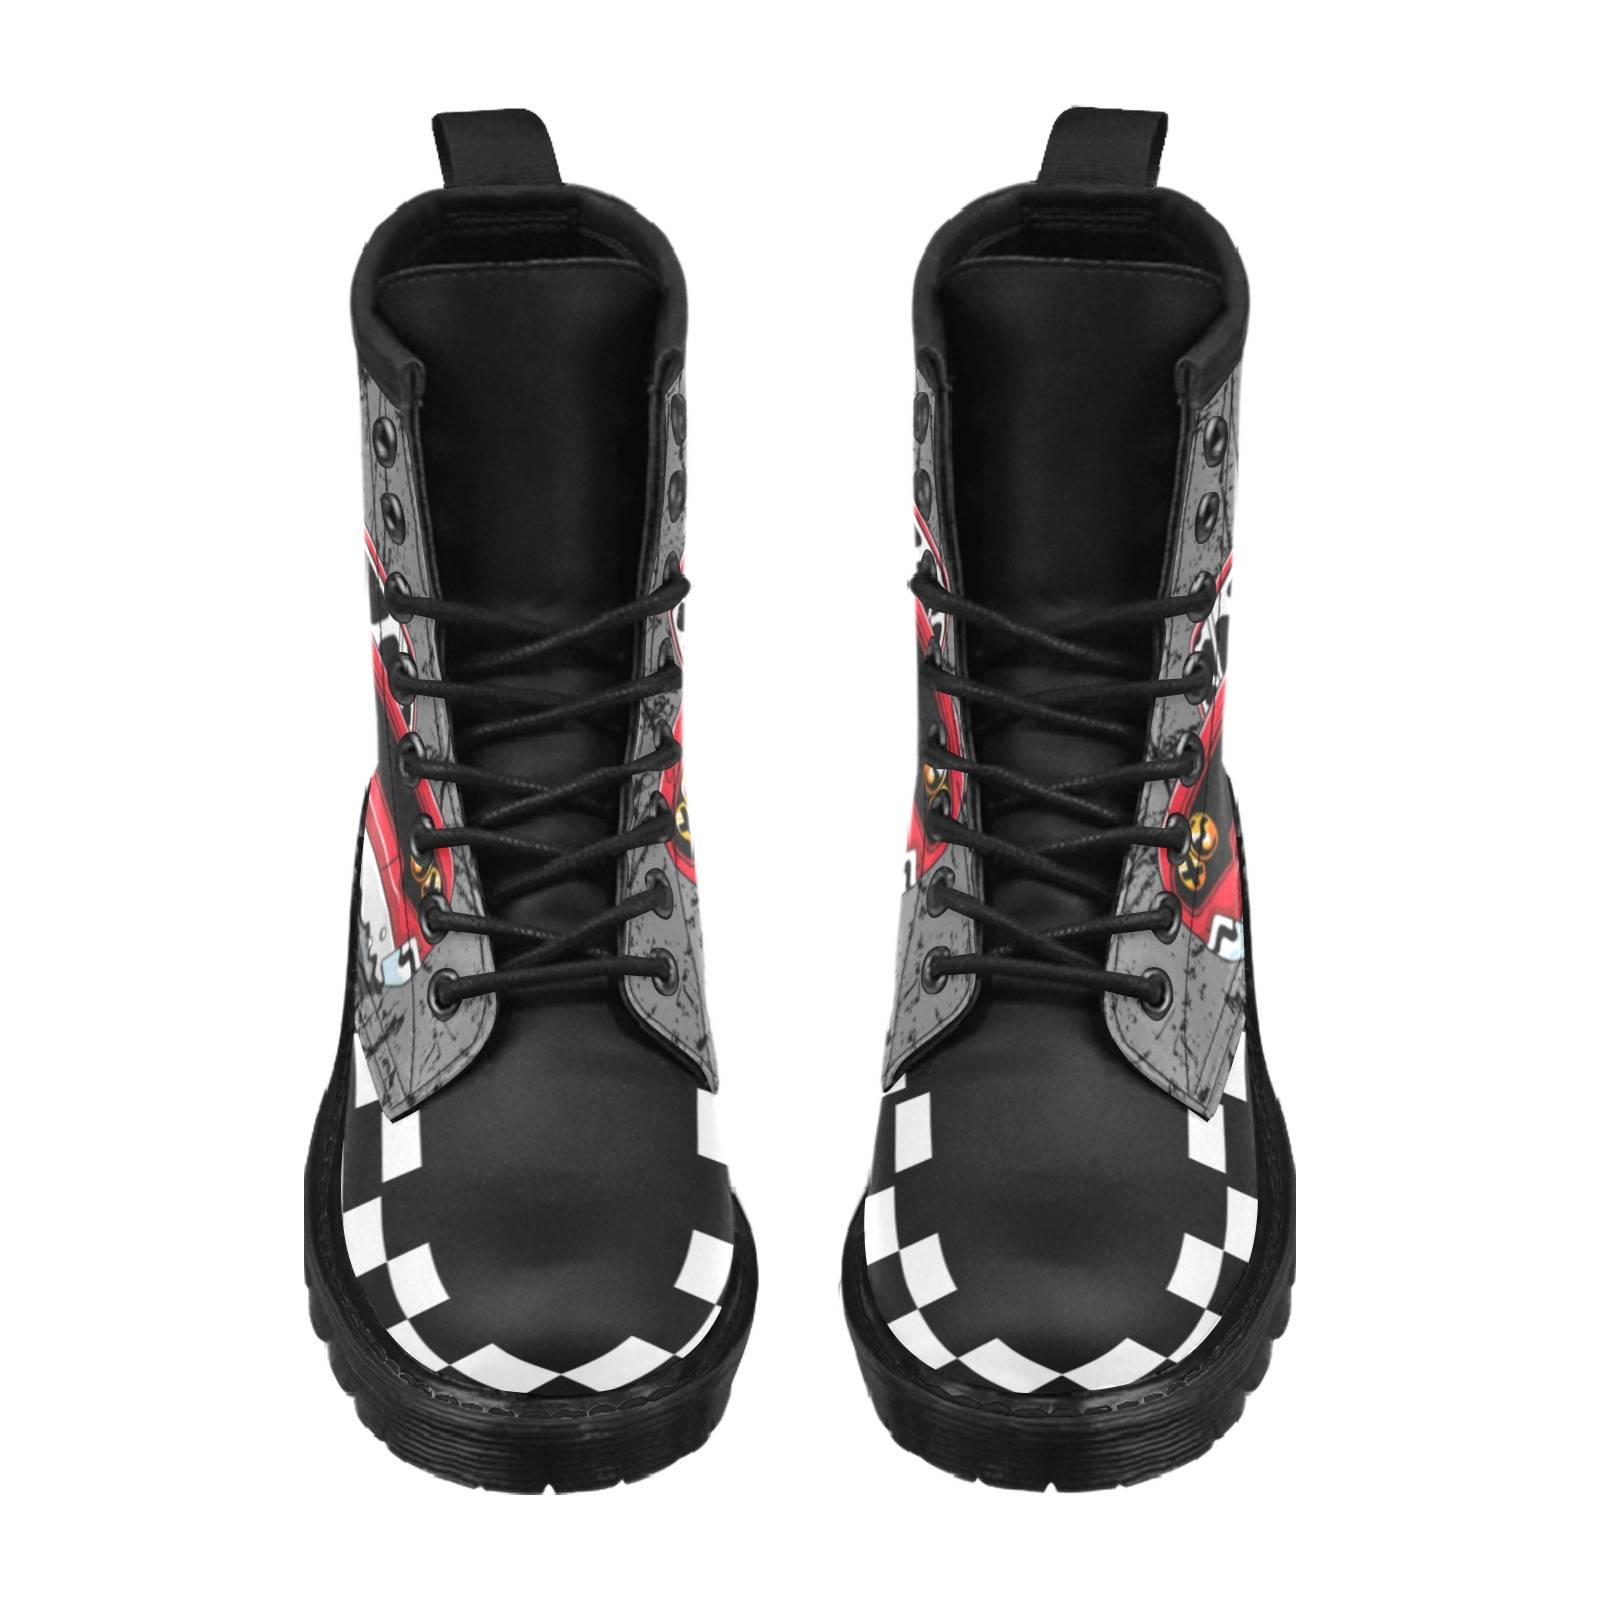 Racing PU Leather Boots – Checkered Sides